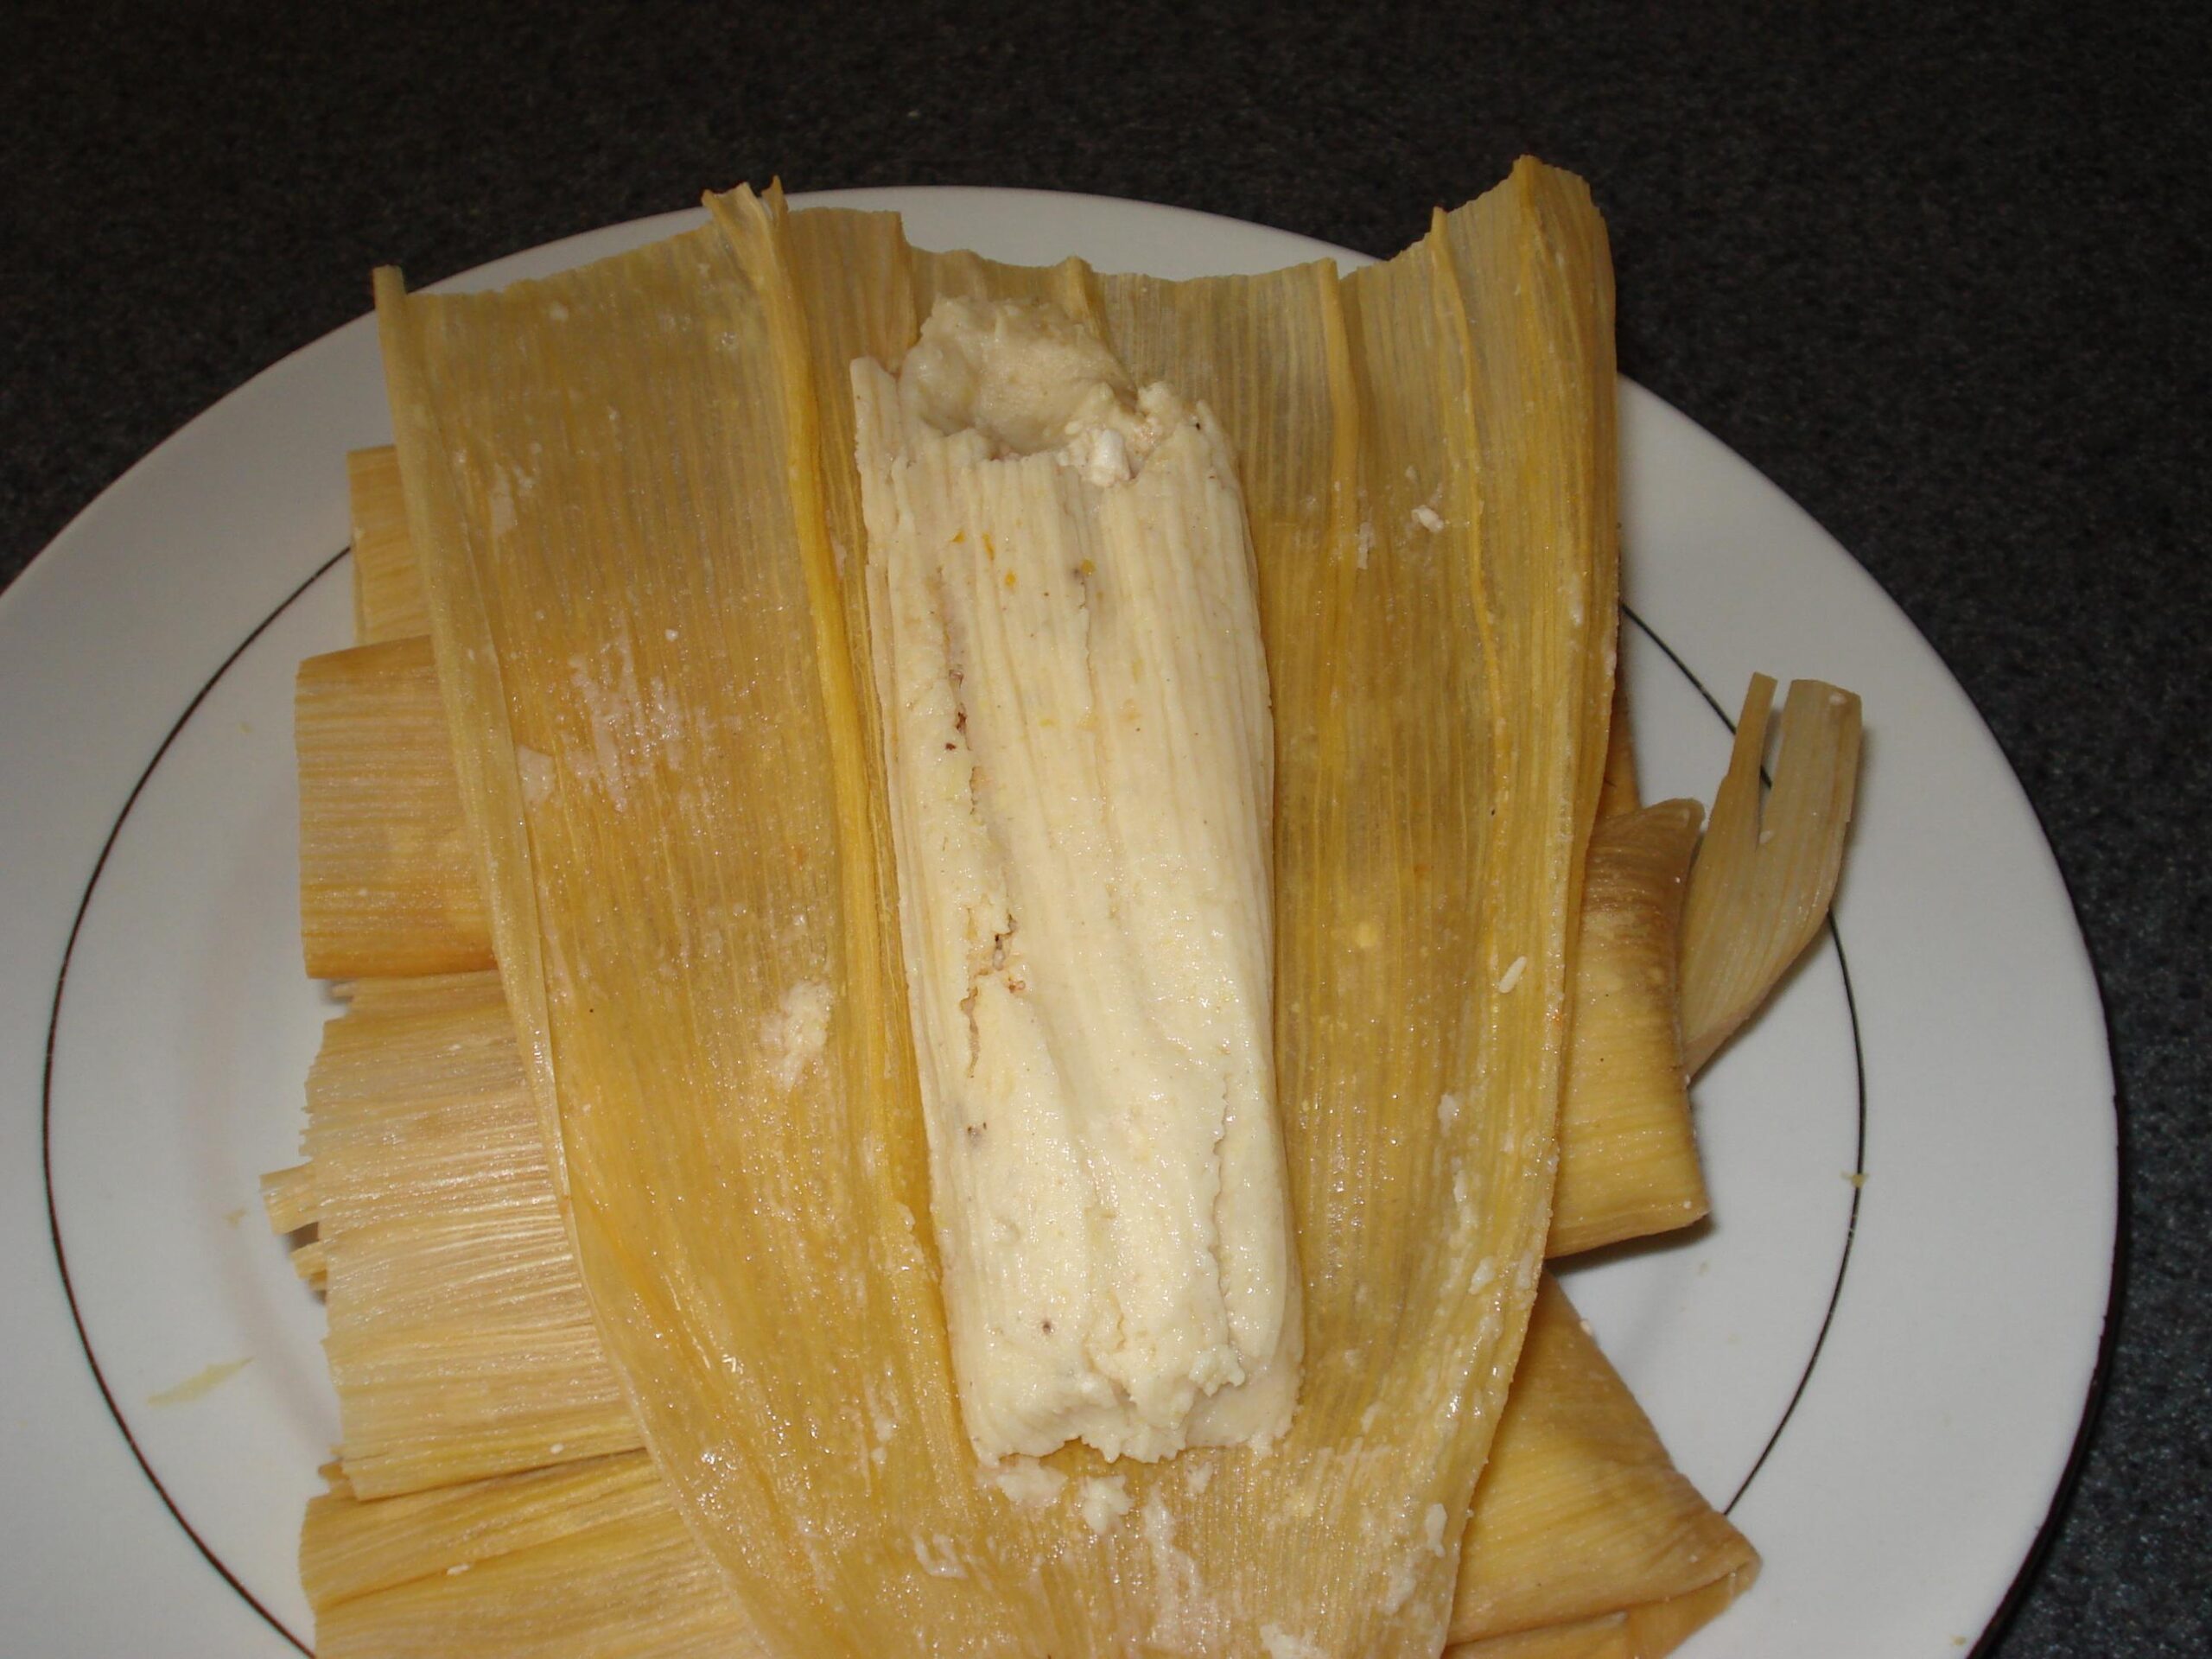  Wrapped up and ready to go - vegetarian tamales for the win!